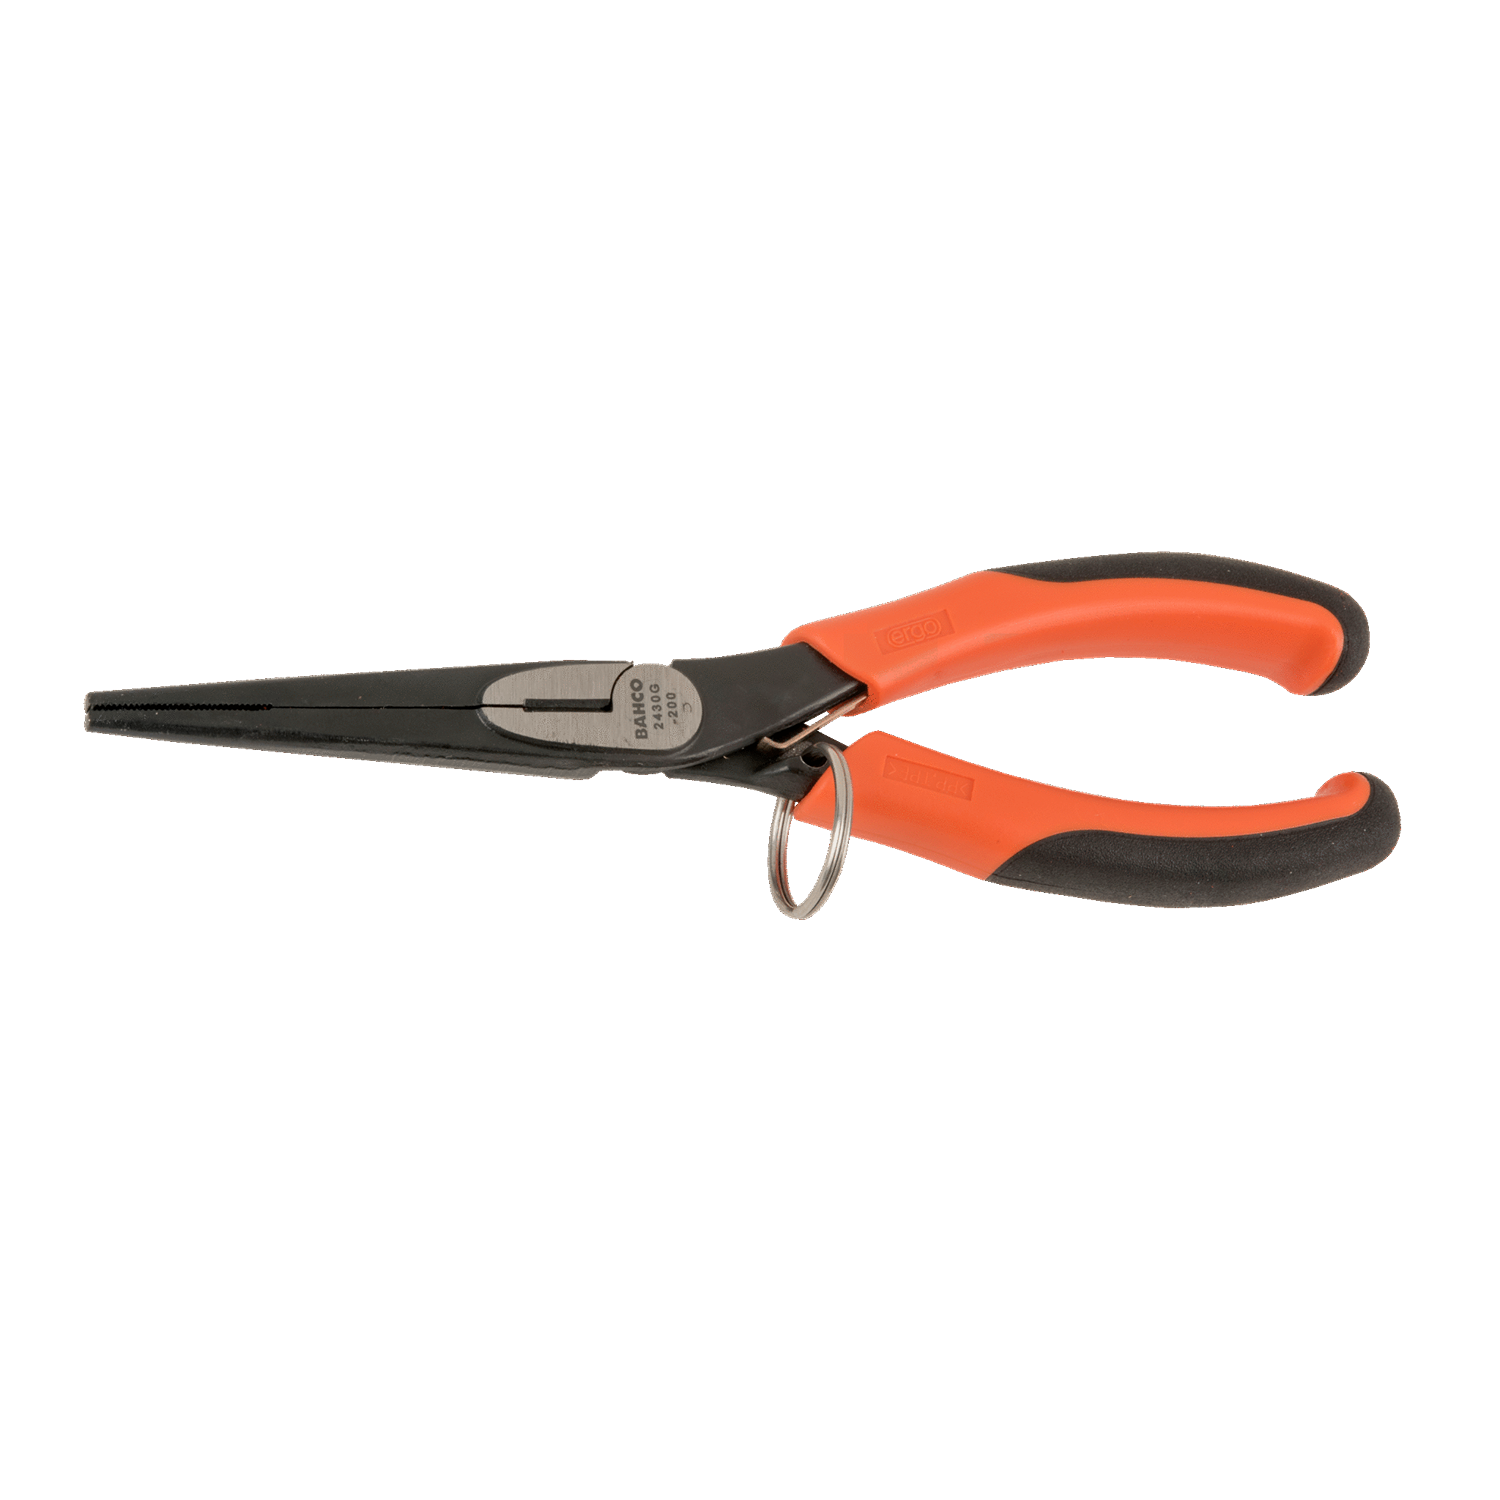 BAHCO TAH2430G ERGO Snipe Nose Plier with Safety Ring - Premium Snipe Nose Plier from BAHCO - Shop now at Yew Aik.